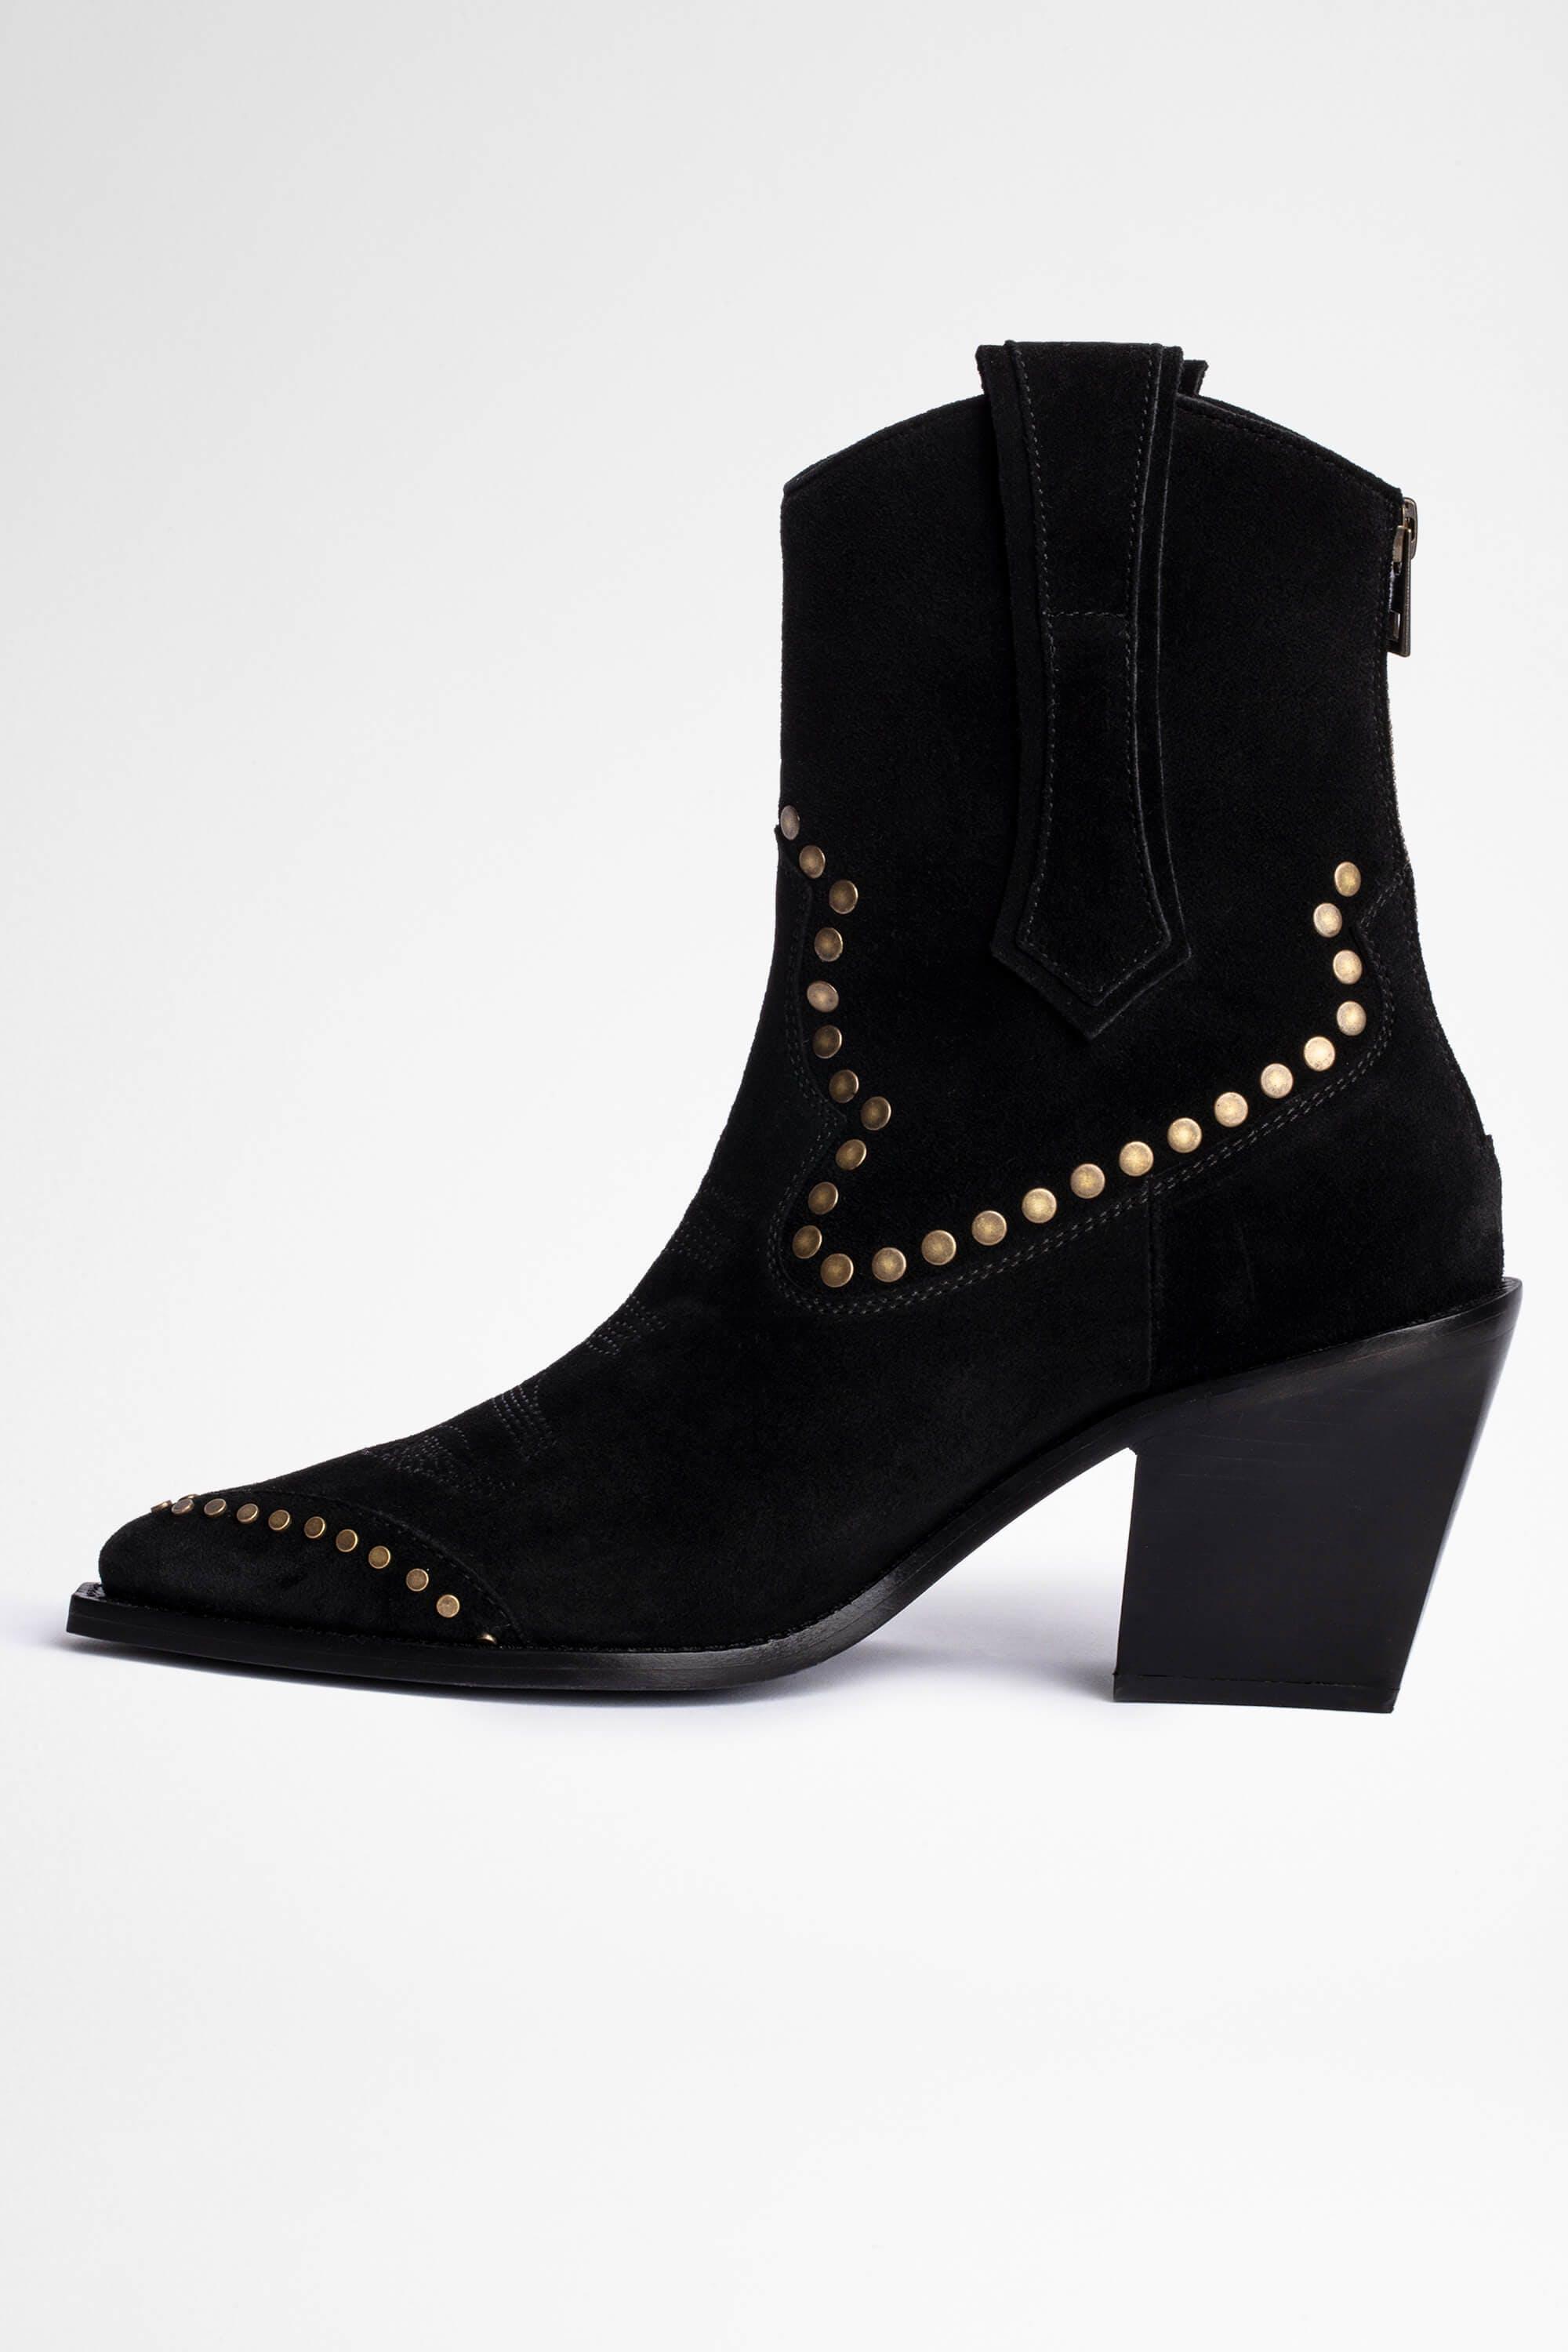 Zadig & Voltaire Suede Cara High Boots in Black | Lyst